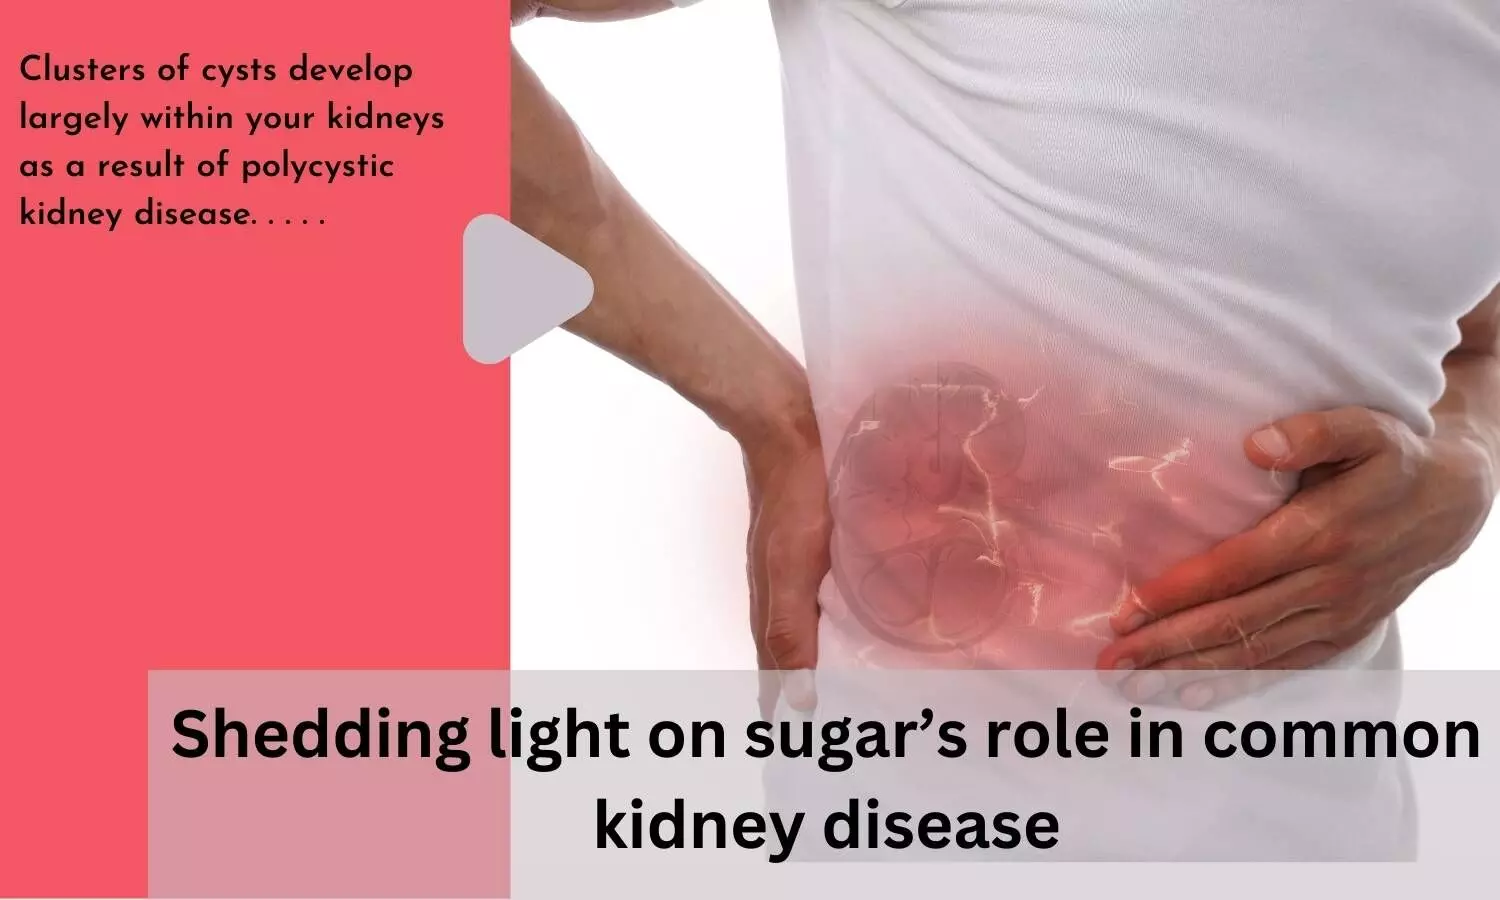 Shedding light on sugars role in common kidney disease